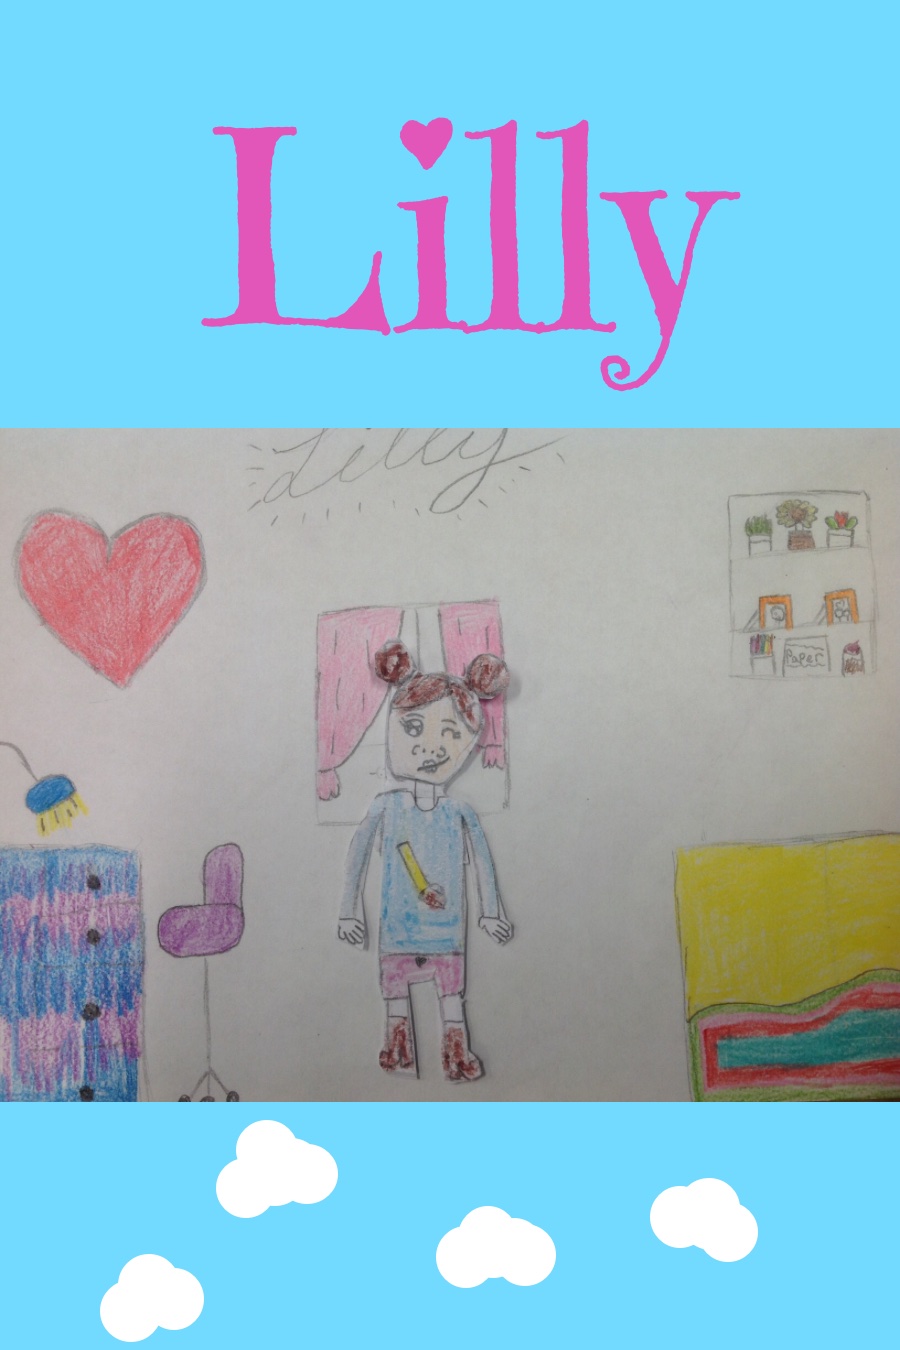 Lilly by Emma H